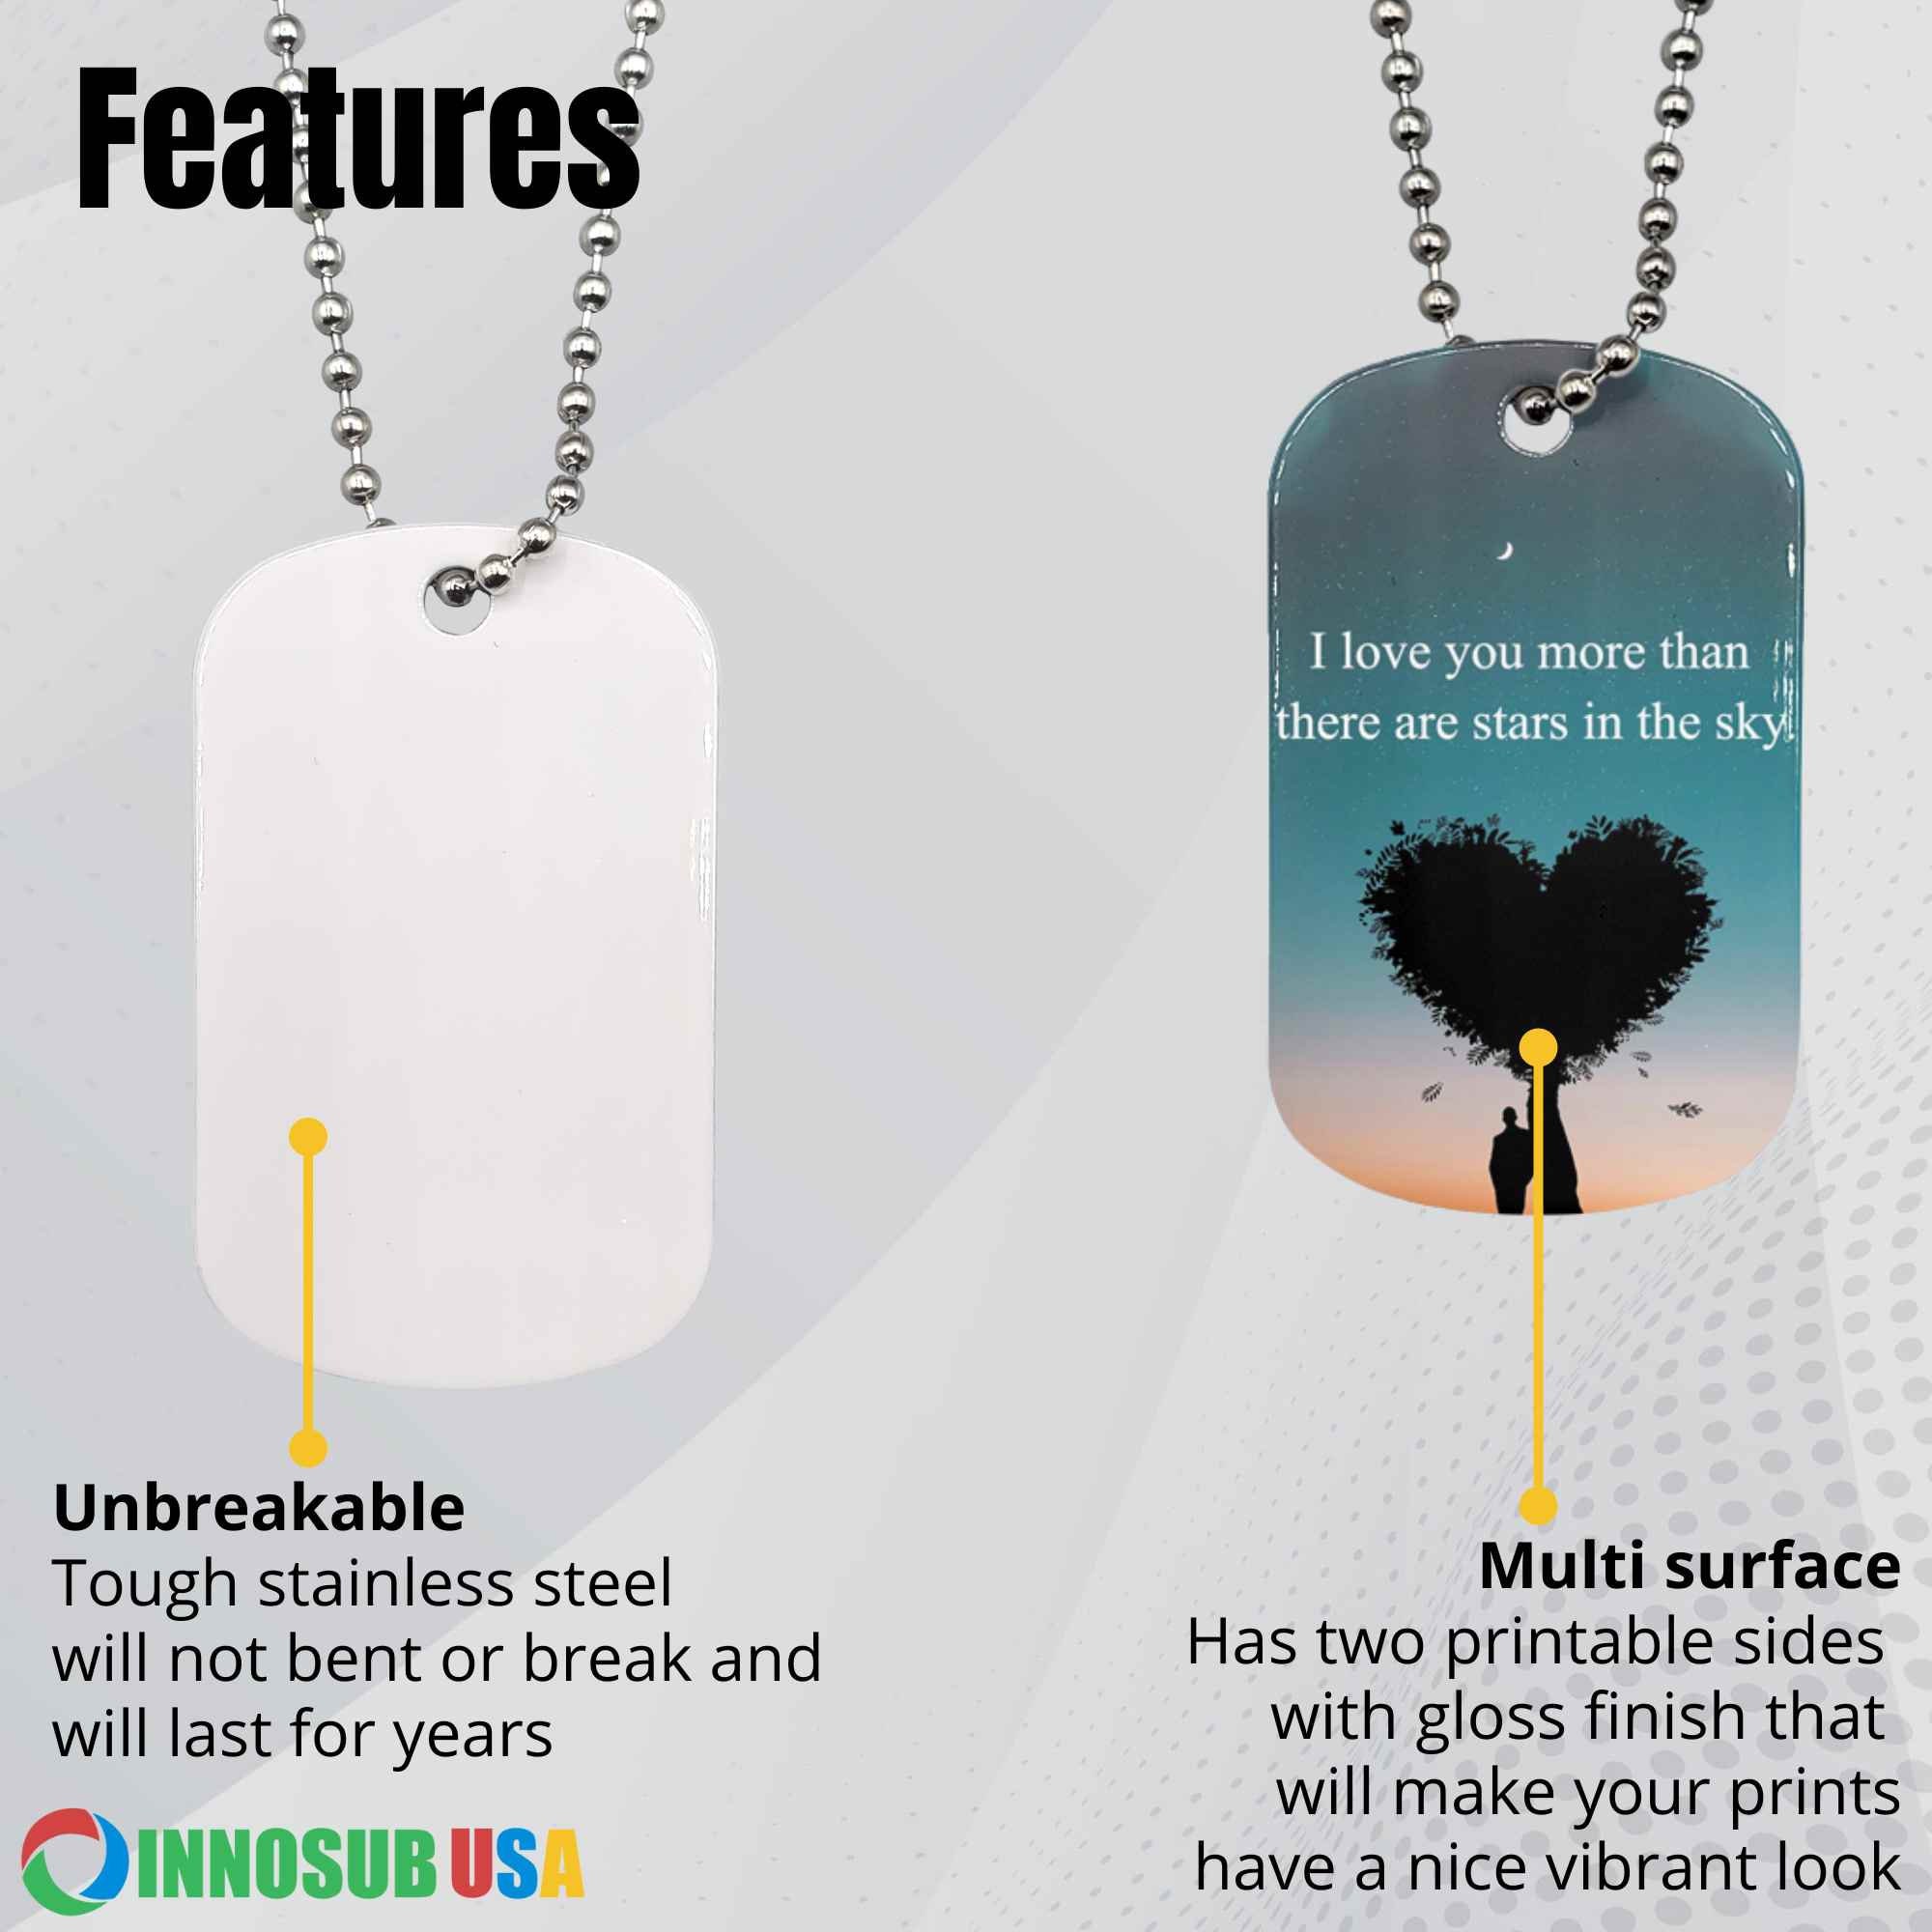 Sublimation Dog Tag Blank Locket 2 Sided - Stainless Steel - SPC -  Sublimation Phone Cases